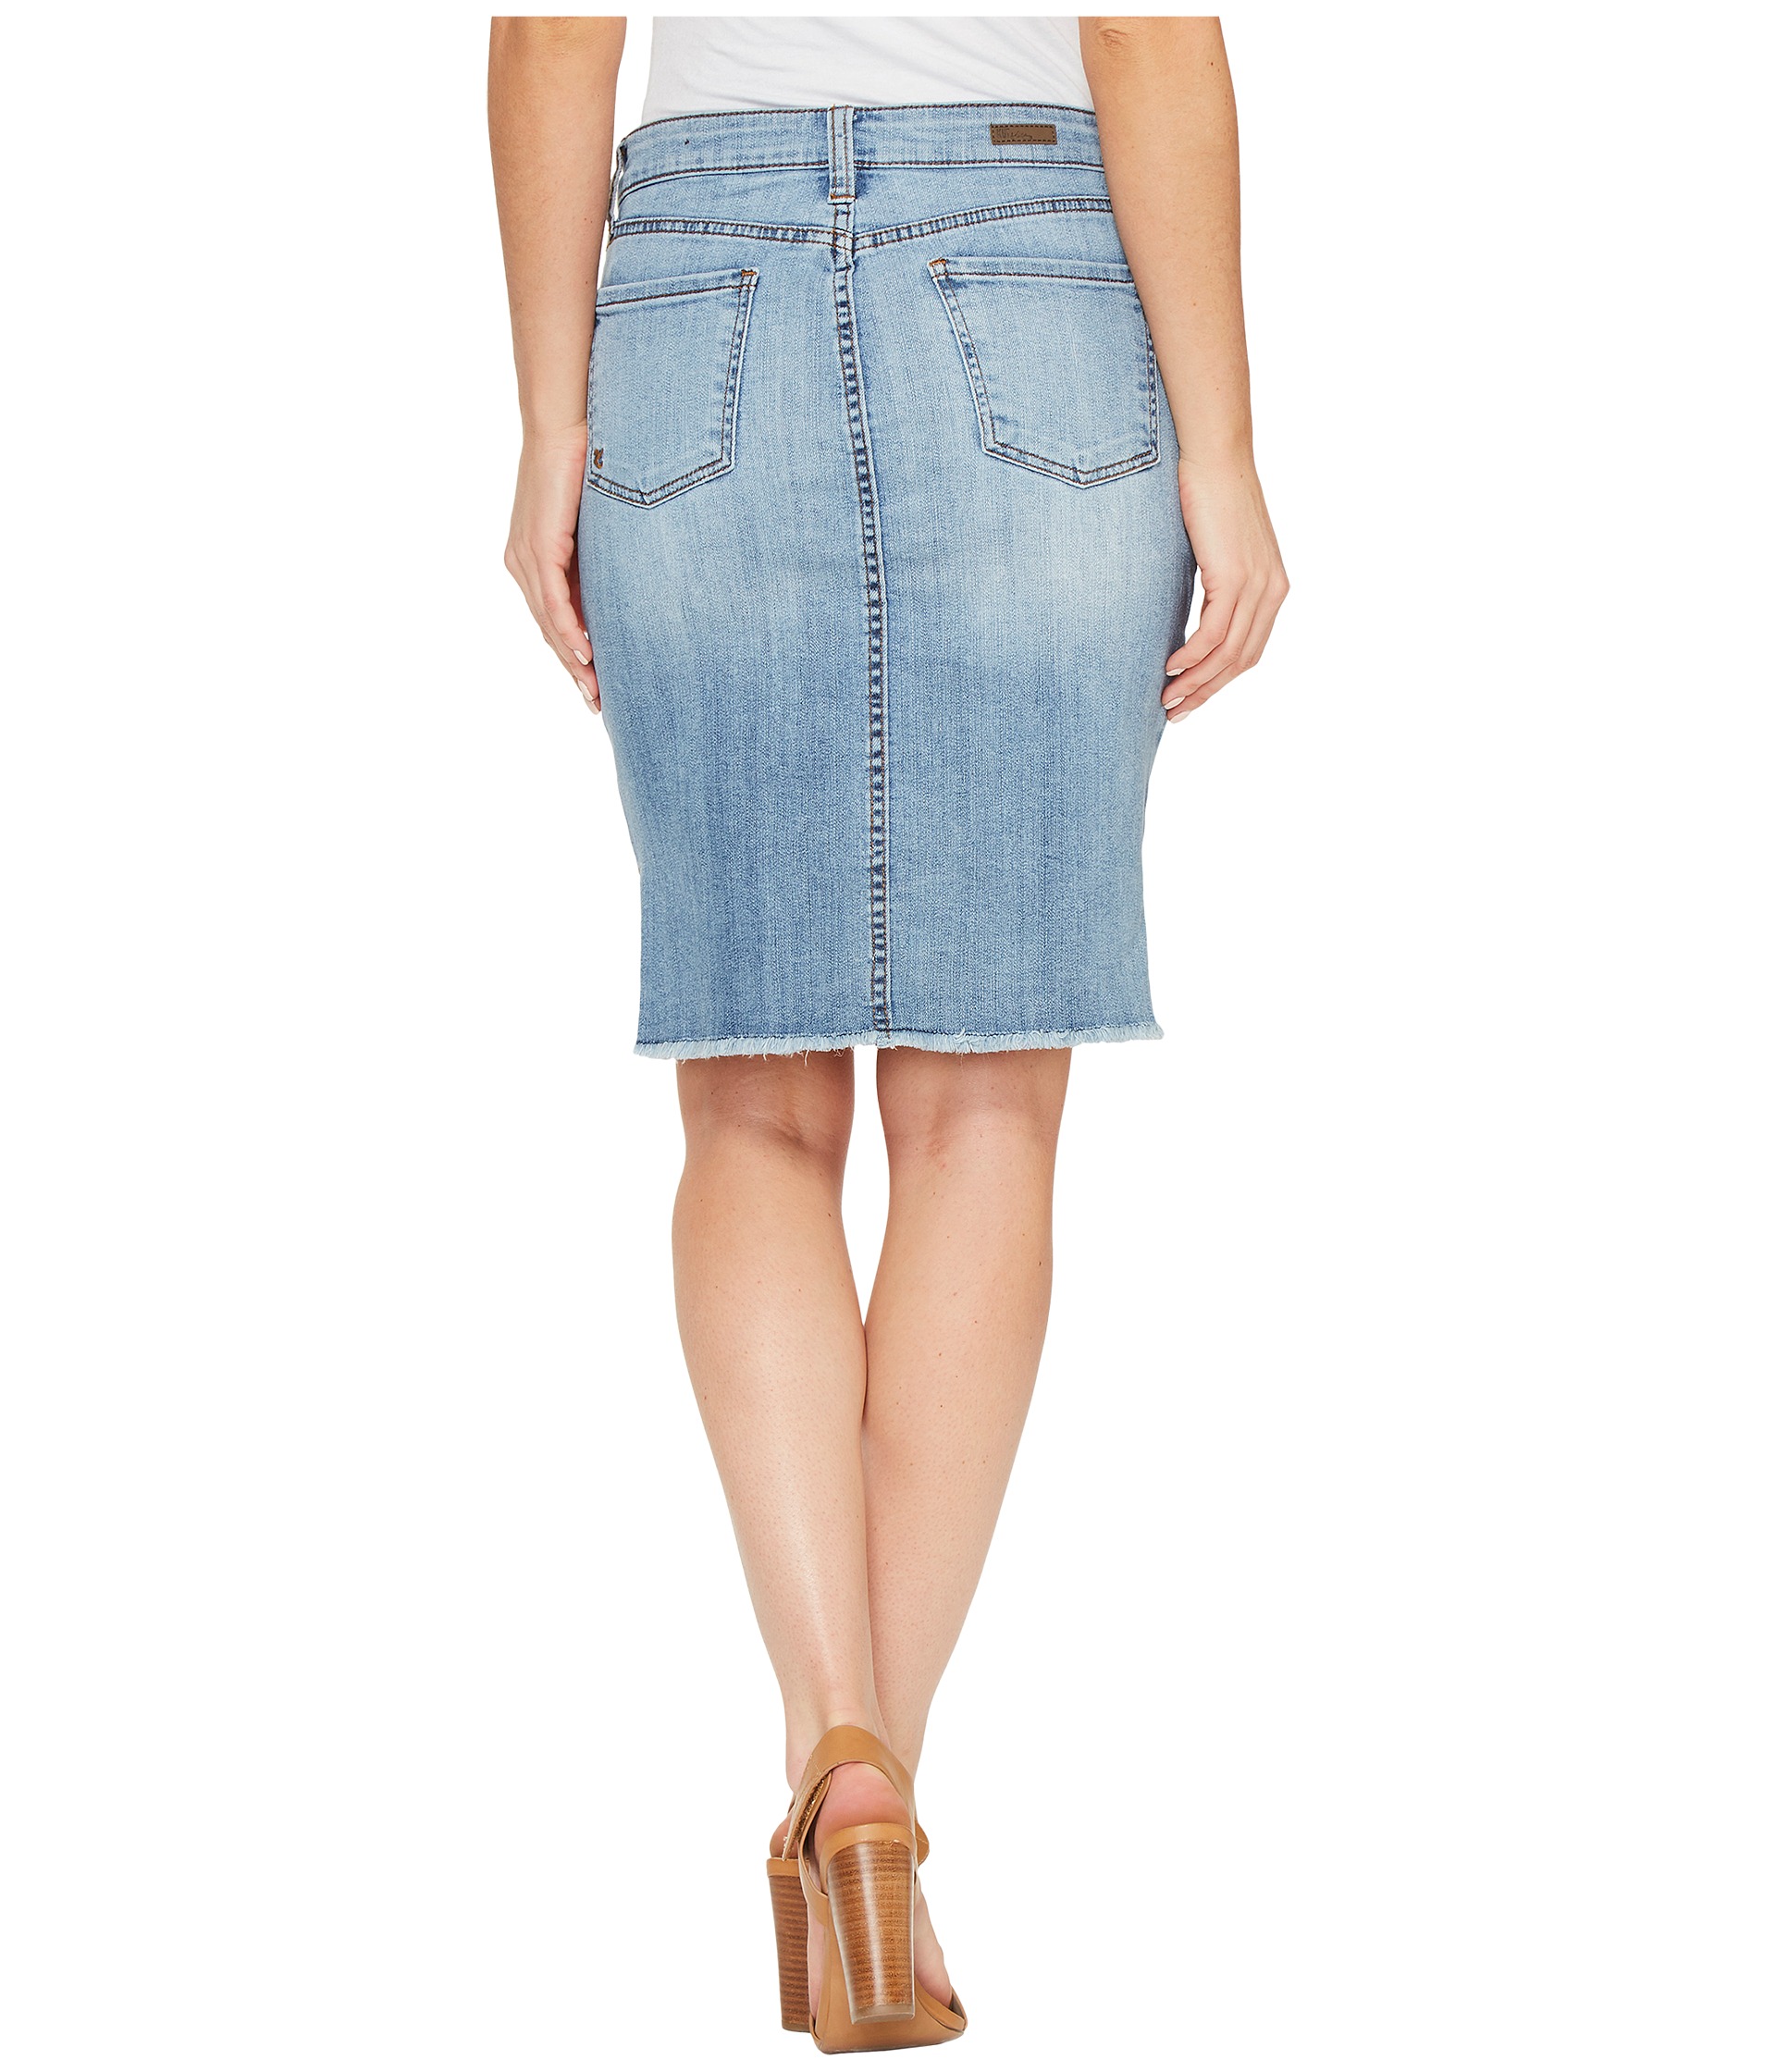 KUT from the Kloth Connie Hi-Low Skirt in Dashing at Zappos.com